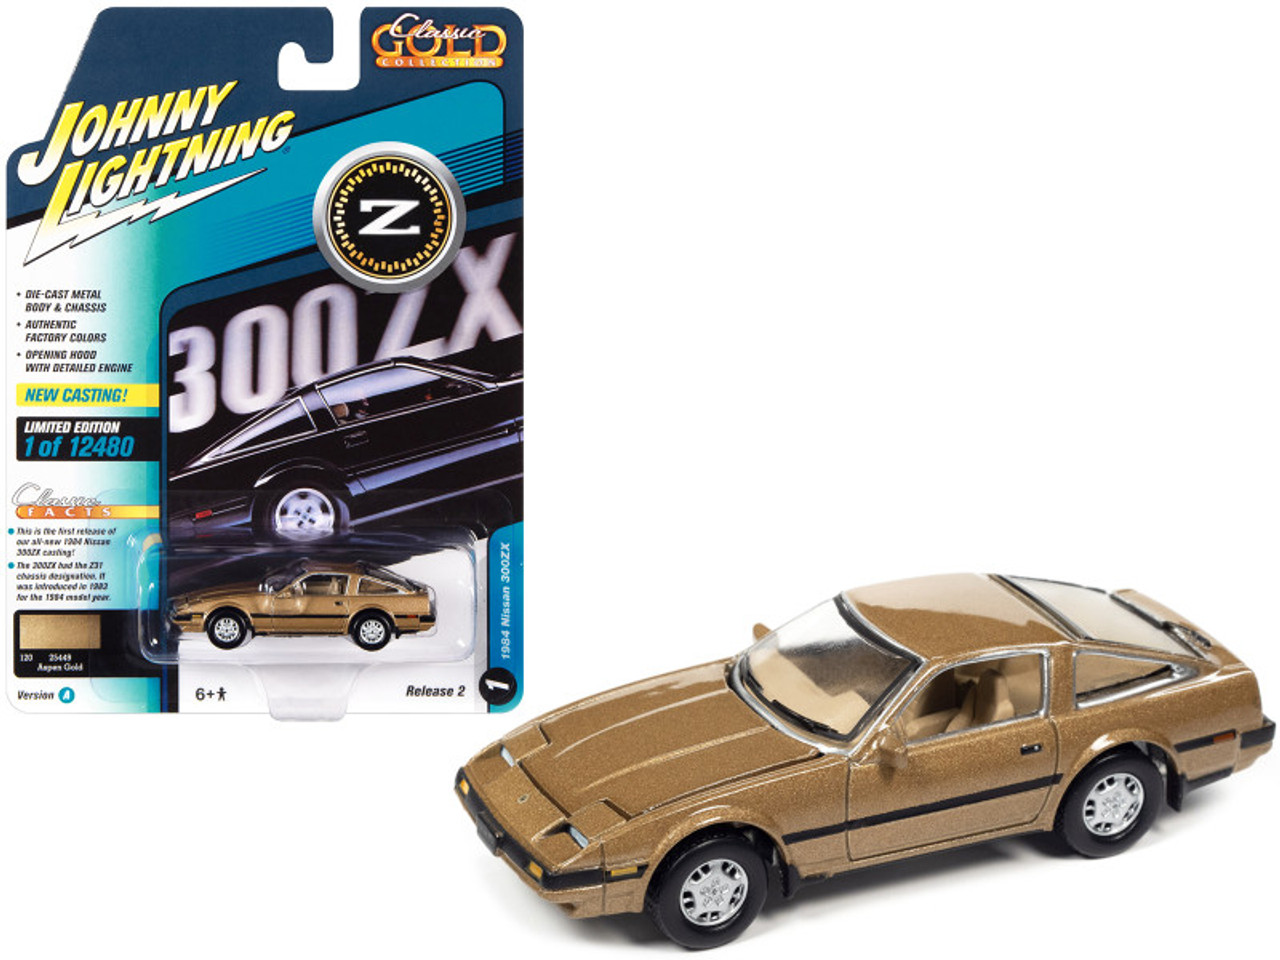 1984 Nissan 300ZX Aspen Gold Metallic with Black Stripes "Classic Gold Collection" Series Limited Edition to 12480 pieces Worldwide 1/64 Diecast Model Car by Johnny Lightning